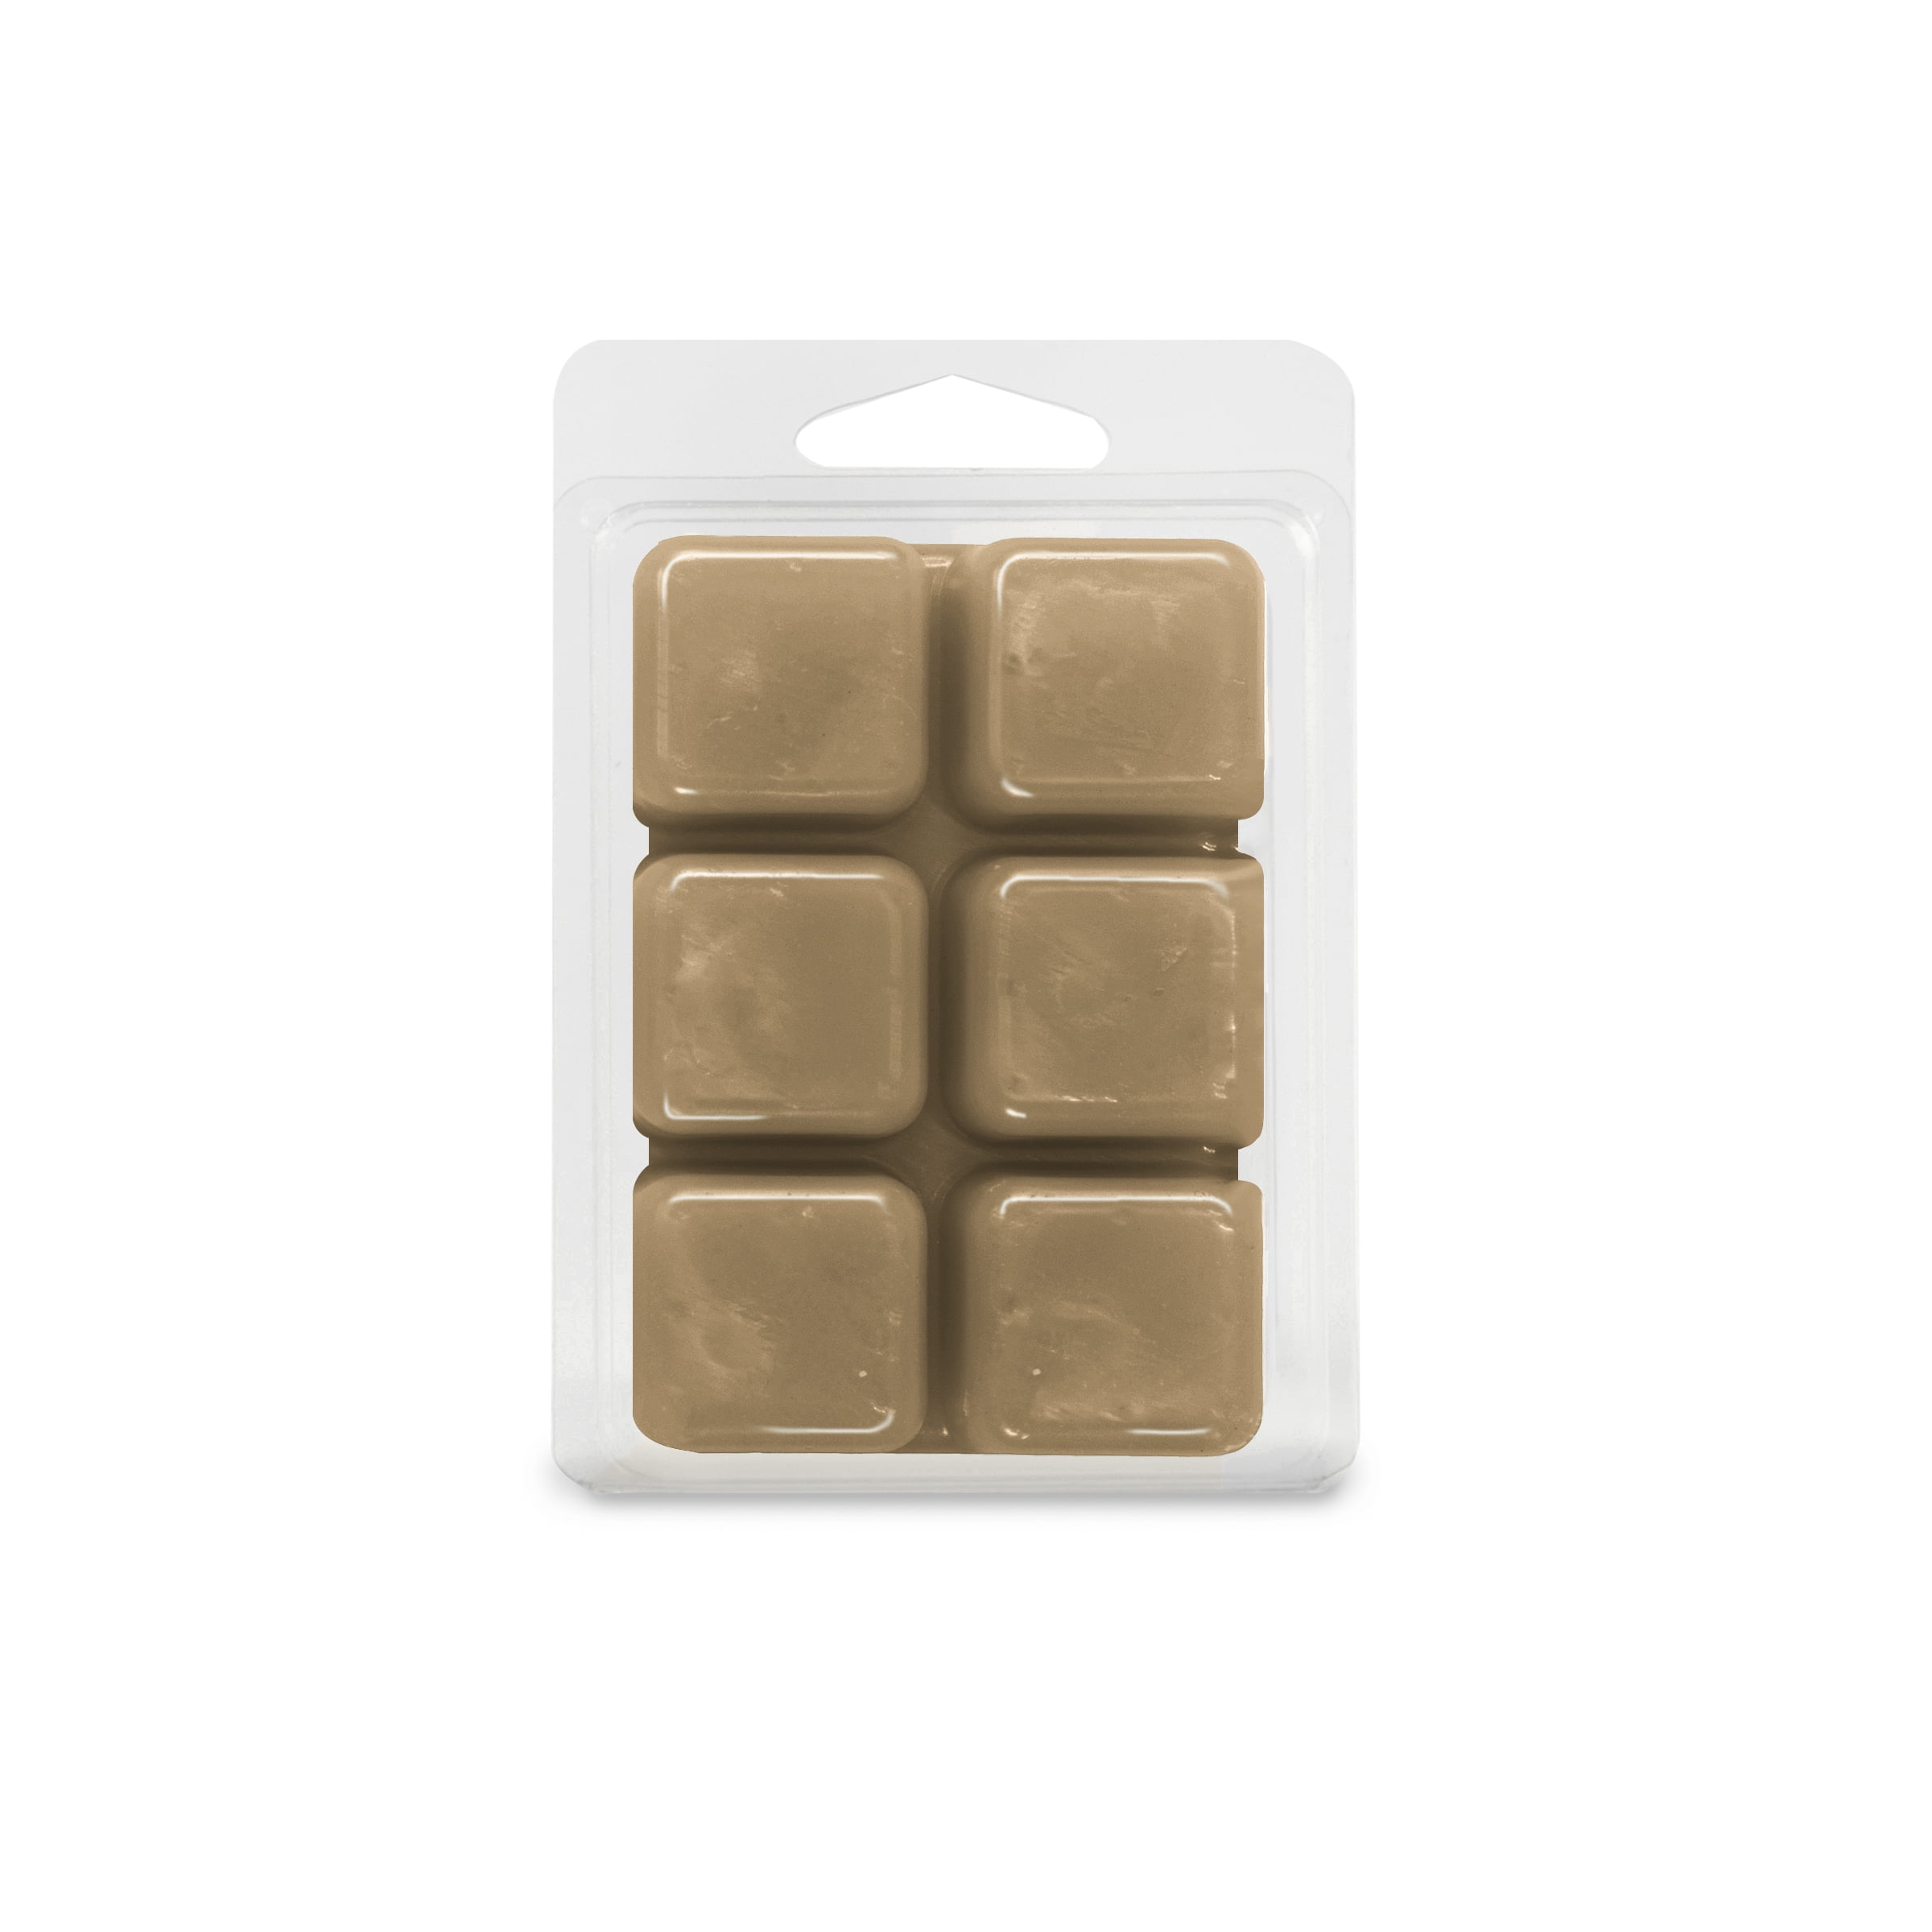 ScentSationals 2.5 ounce Scented Wax Candle Melts Salted Caramel